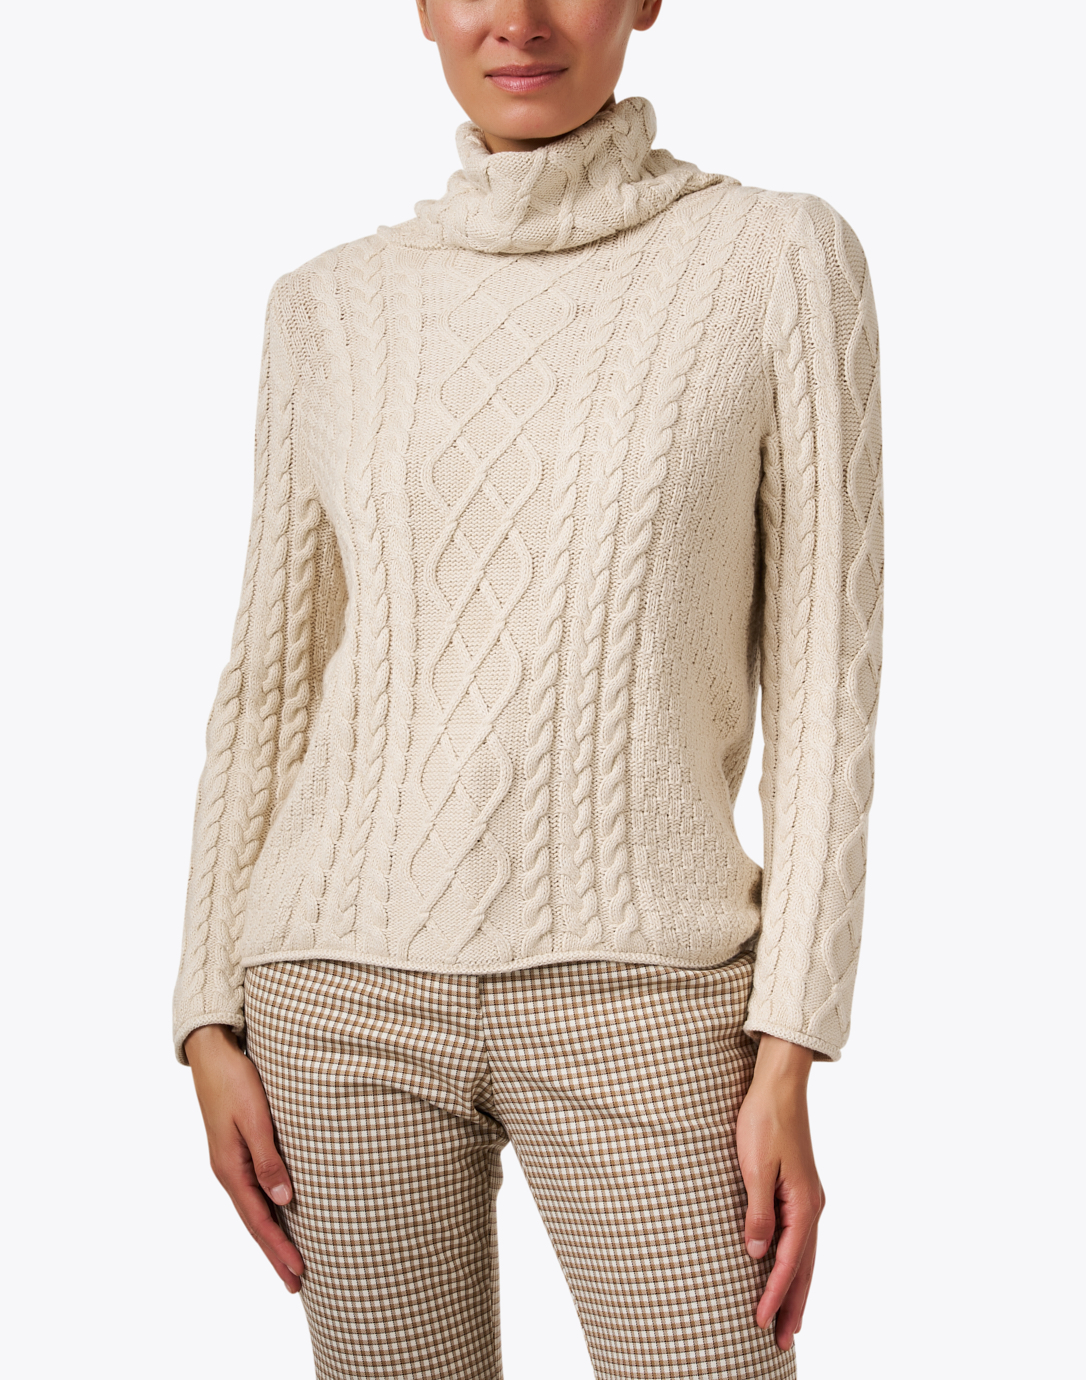 Ralph Lauren Women's Cable-Knit Wool-Cashmere Sweater - Size M in Authentic Cream